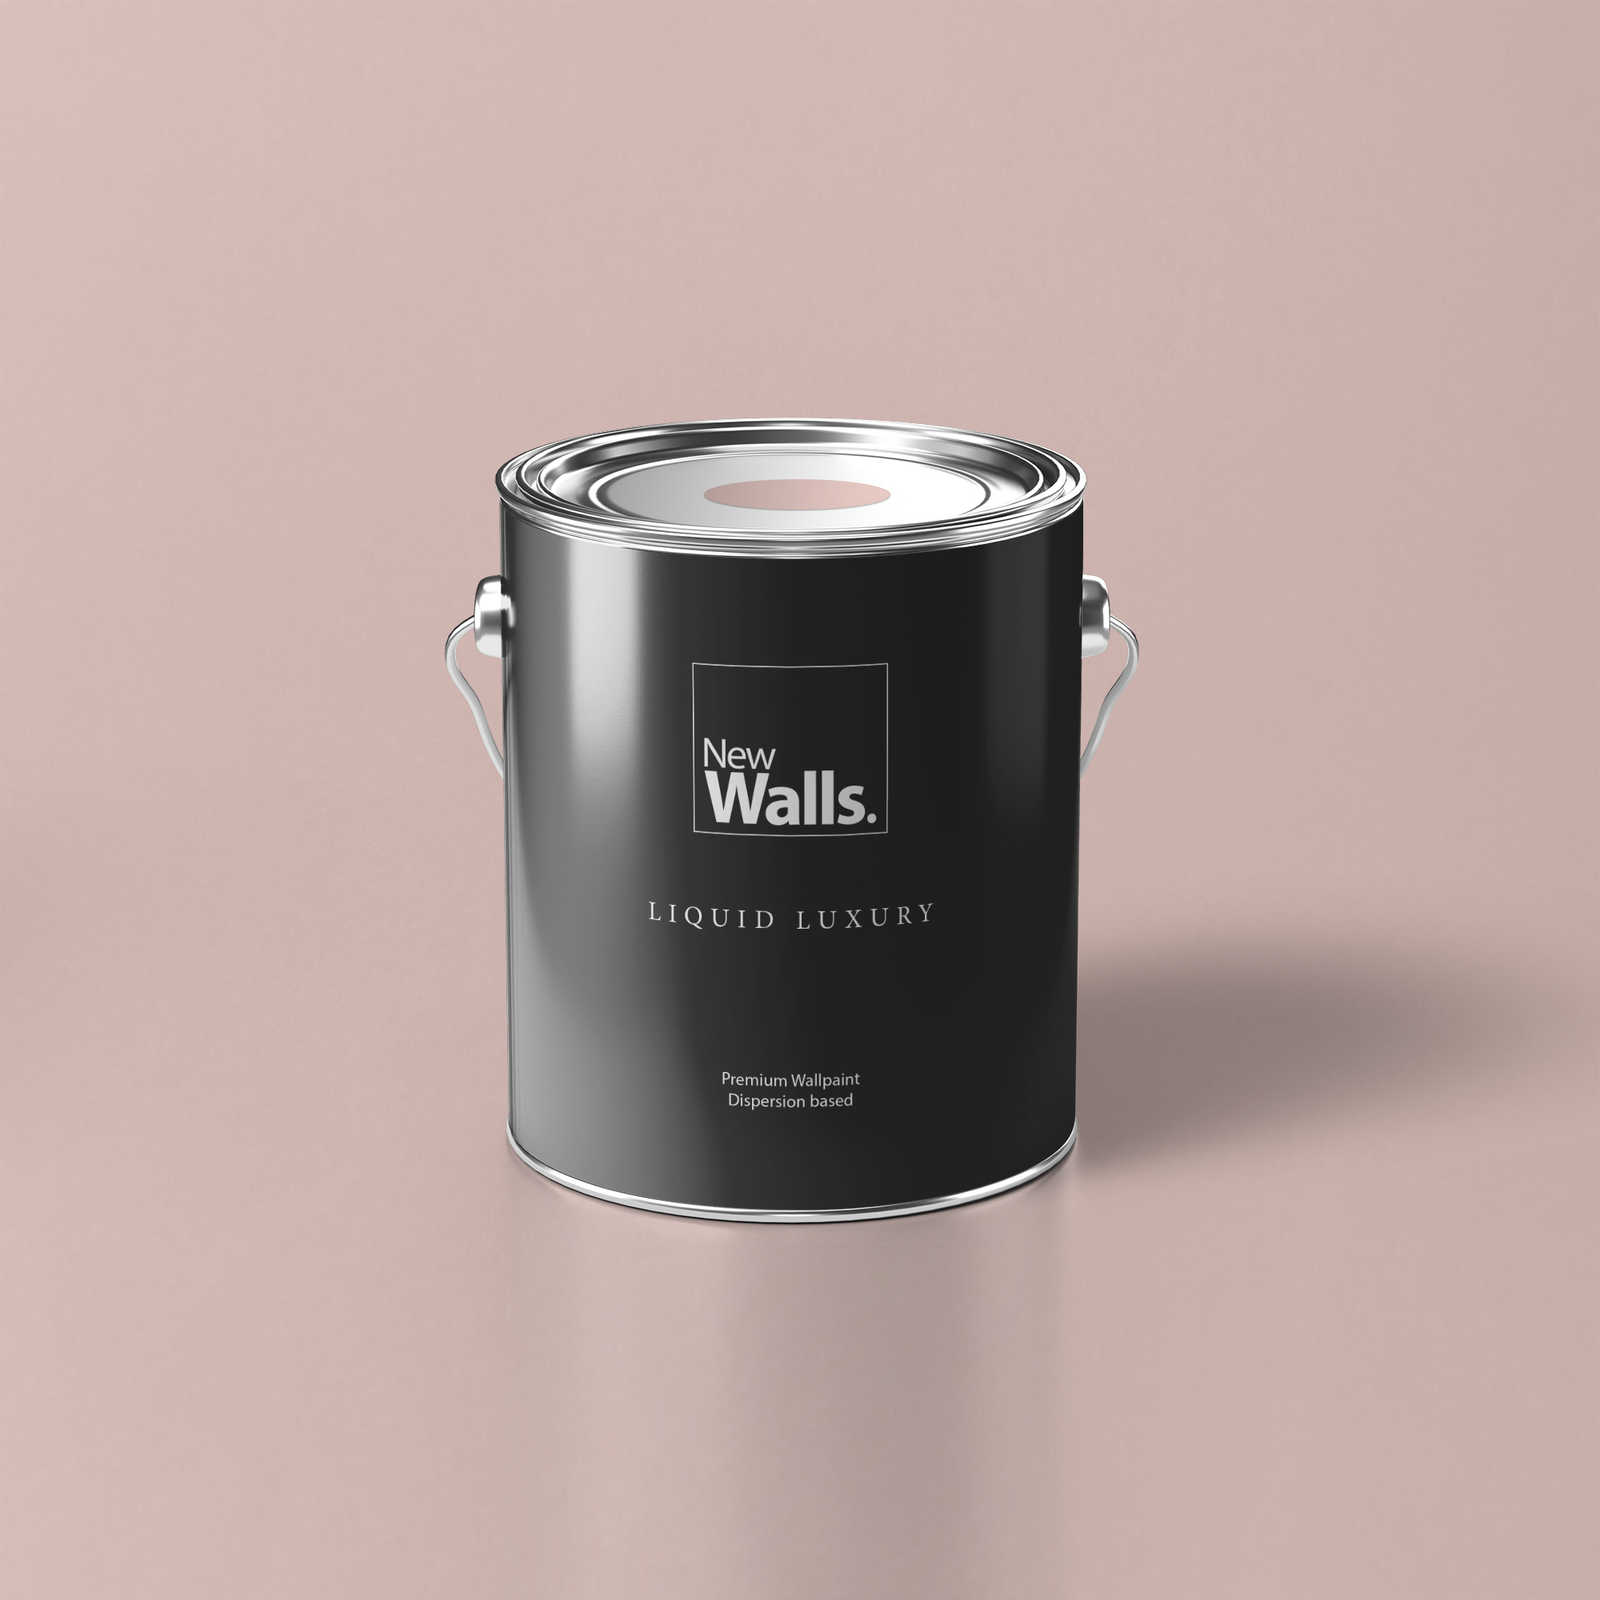 Premium Wall Paint Homely Old Pink »Luxury Lipstick« NW1001 – 5 litre
